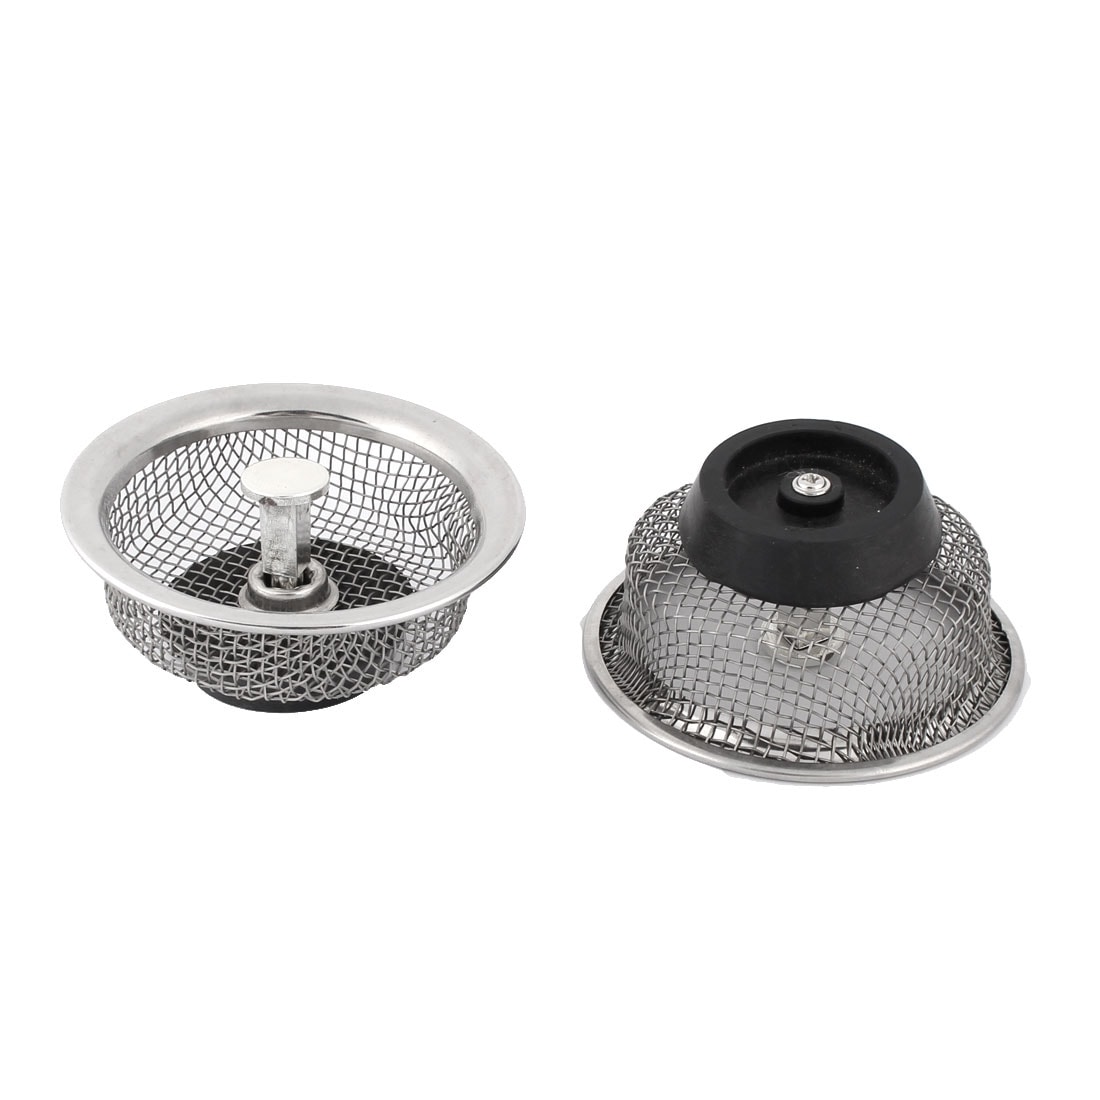 Unique Bargains Stainless Steel Round Sink Floor Drain Strainer Cover 5 inch Dia